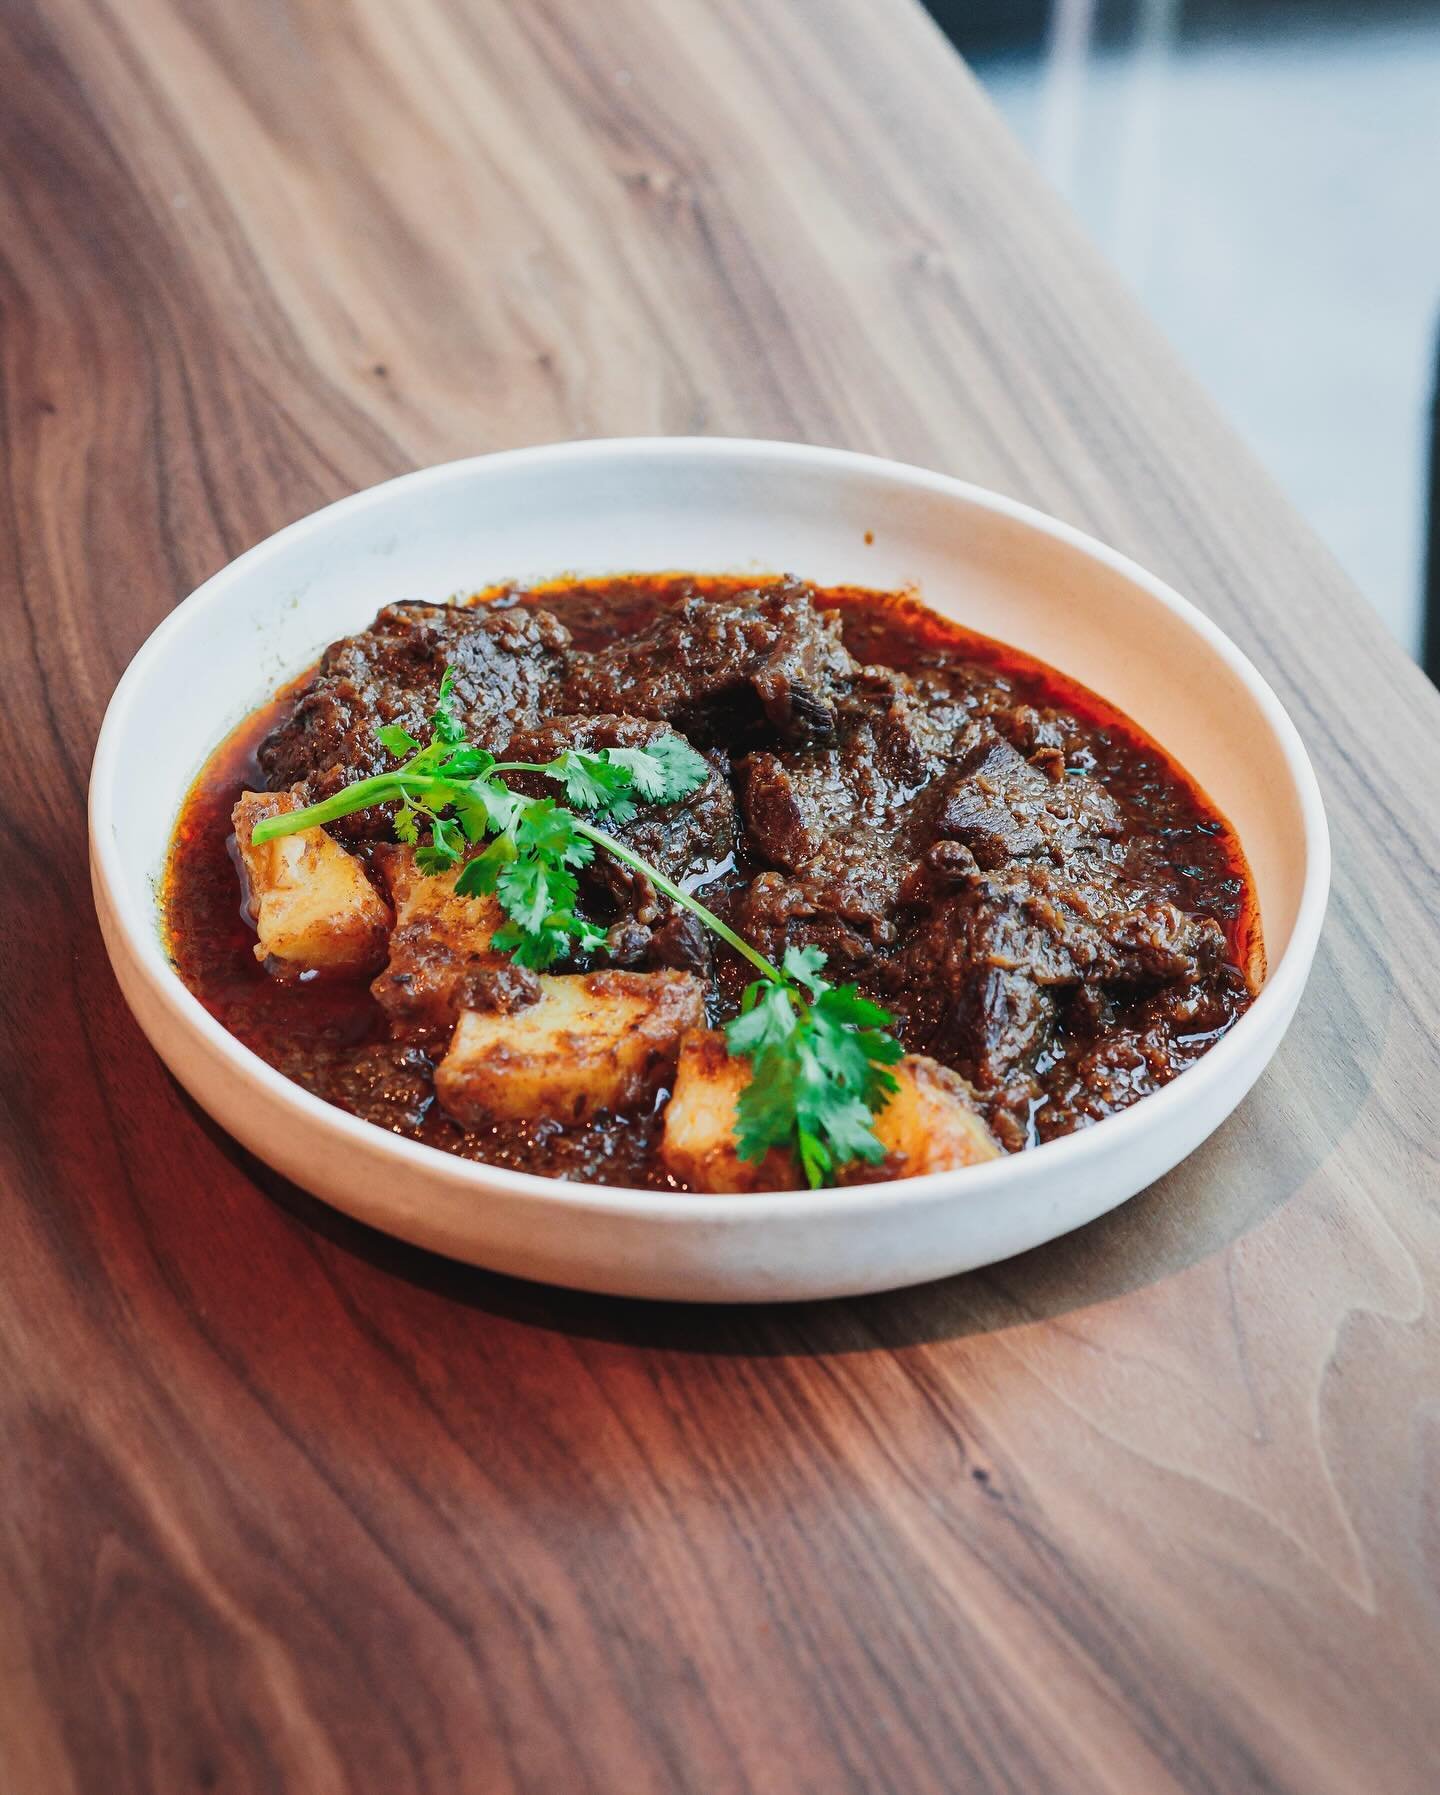 One of our popular dishes: Bob Chucky 😍 Marinated beef with masala seasoning, slow cooked to perfection. We&rsquo;re telling you, this is the dish you want 😏

📍Bay of Burma, San Francisco off Folsom St
Hours: 11:30am-2:30pm, 5pm-9pm, closed Sunday